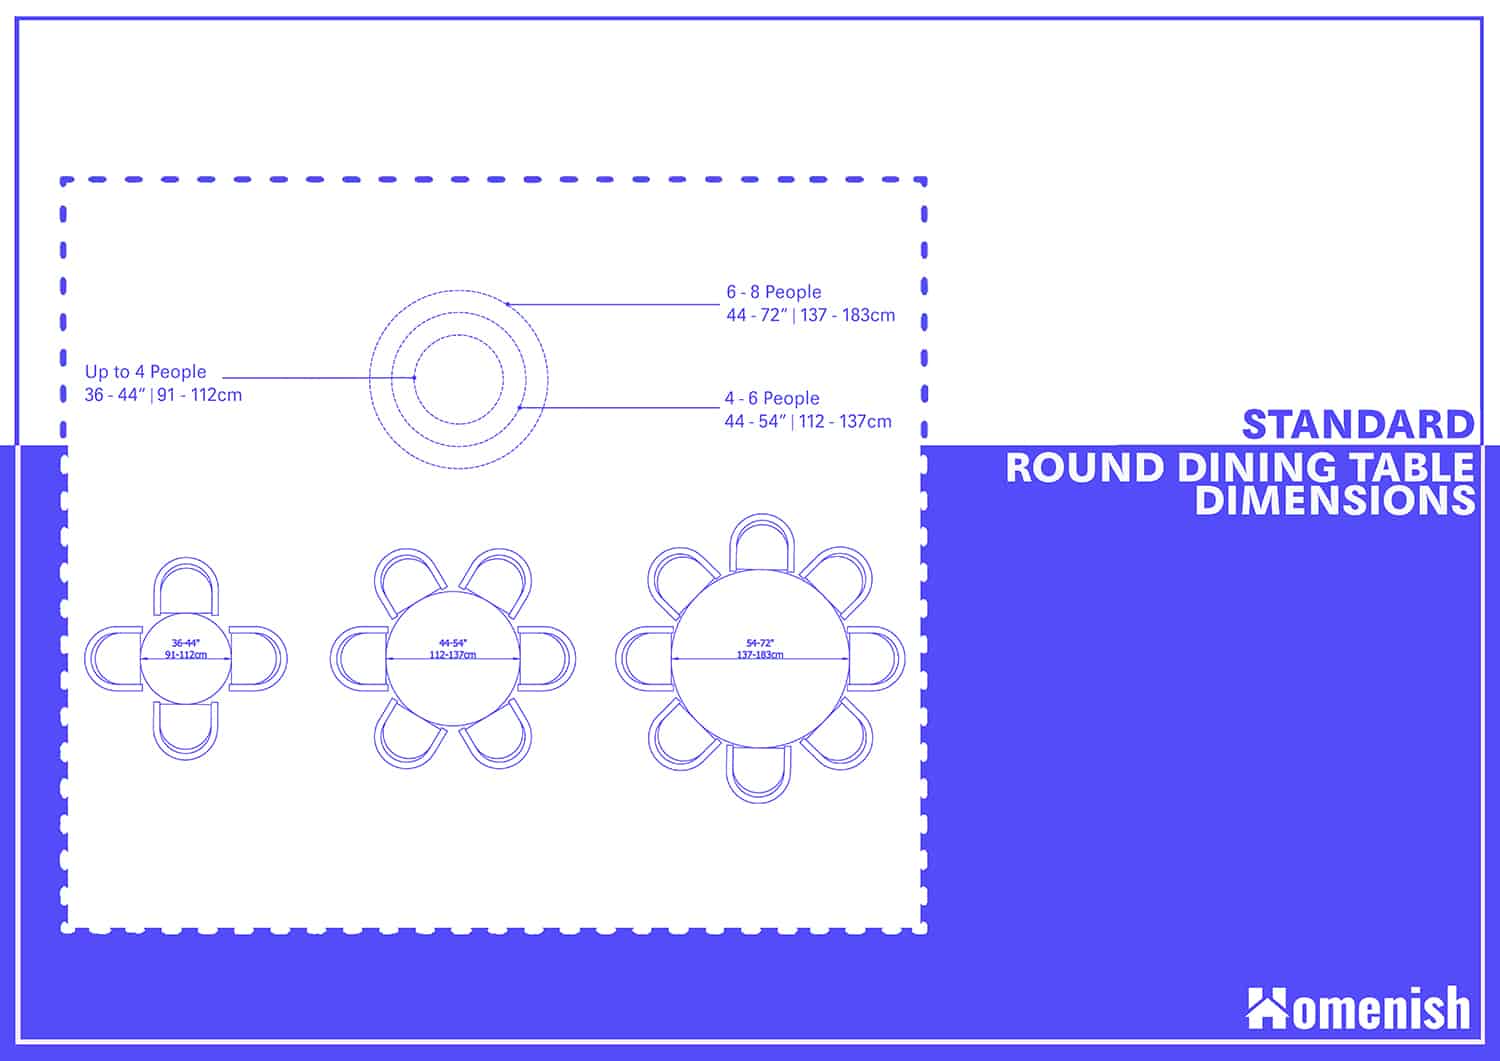 Standard Dining Table Dimensions, How Big Does A Round Table Need To Be Seat 6